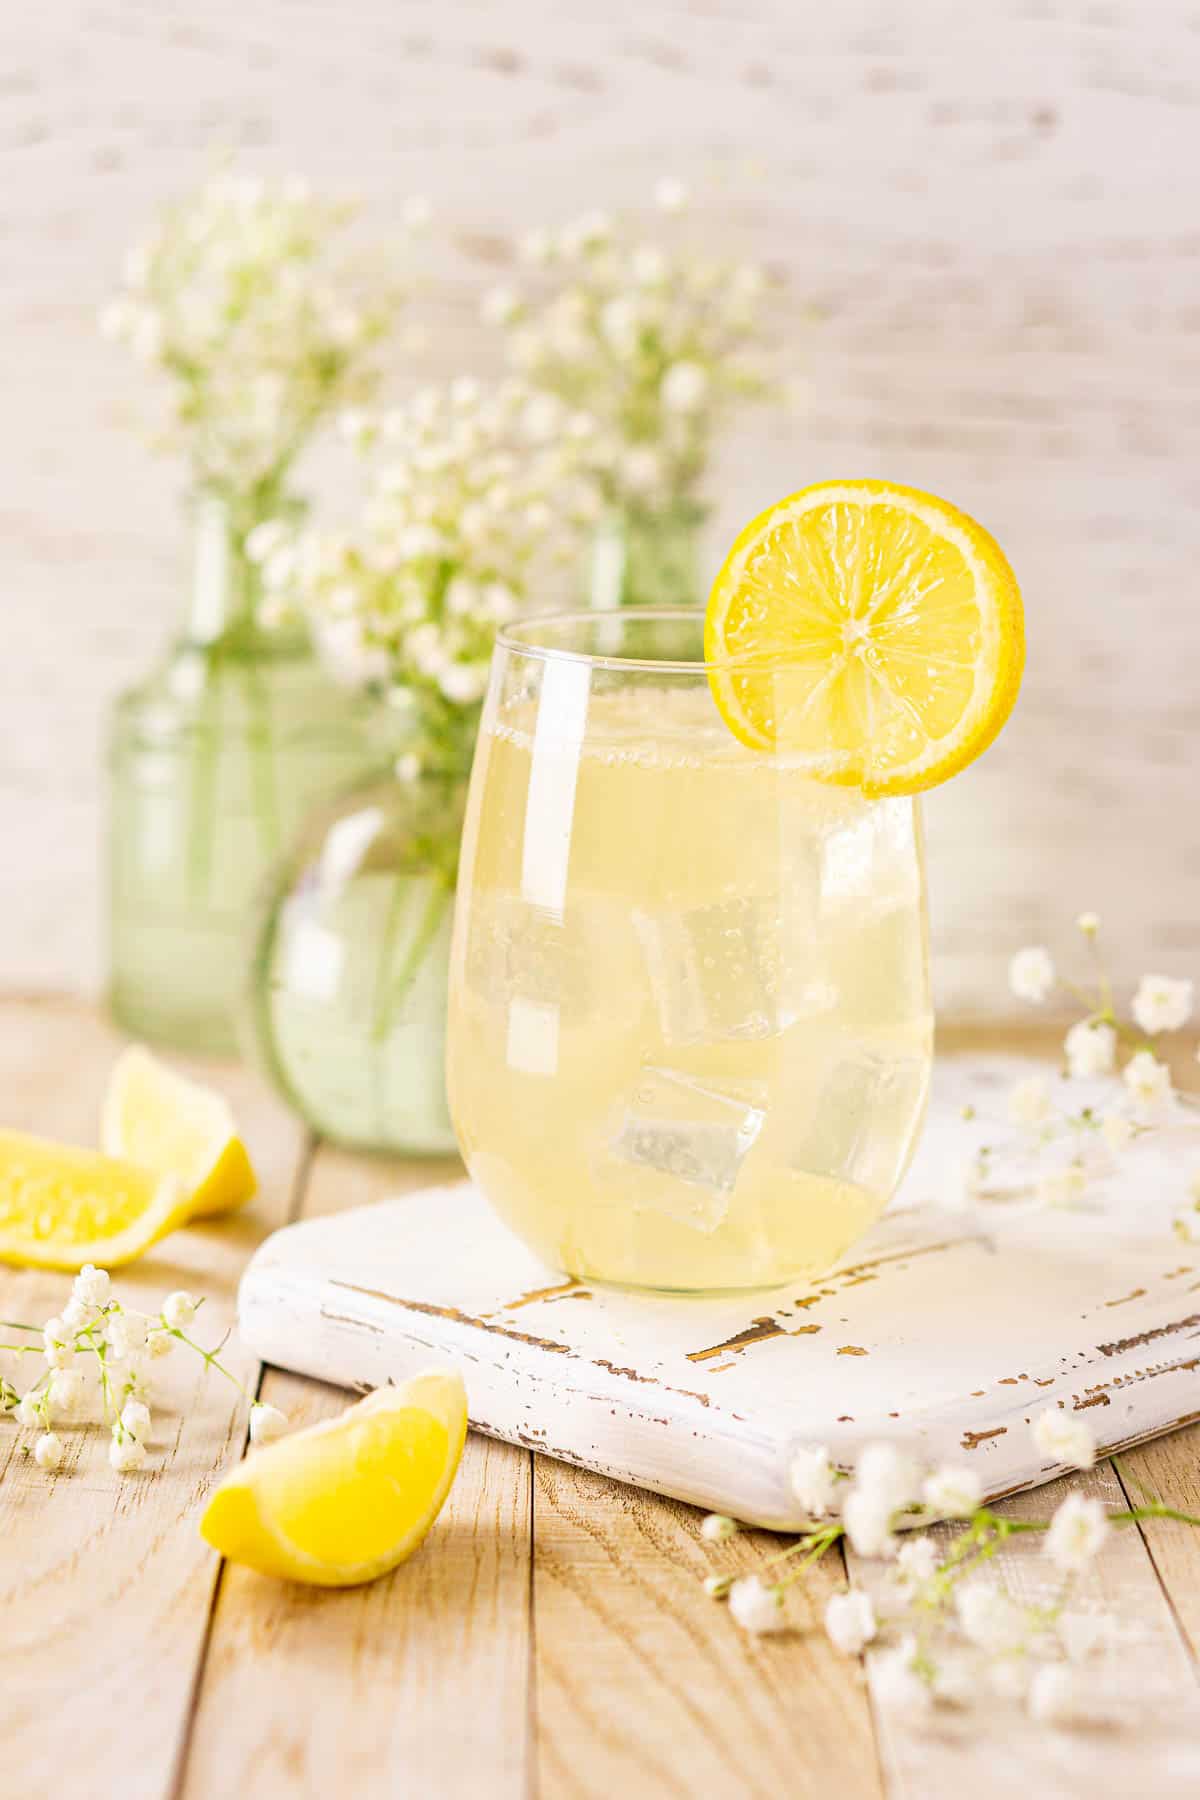 A straight-on view of the St. Germain elderflower spritz on a white wooden tray with white flowers in the background and lemon slices to the side.